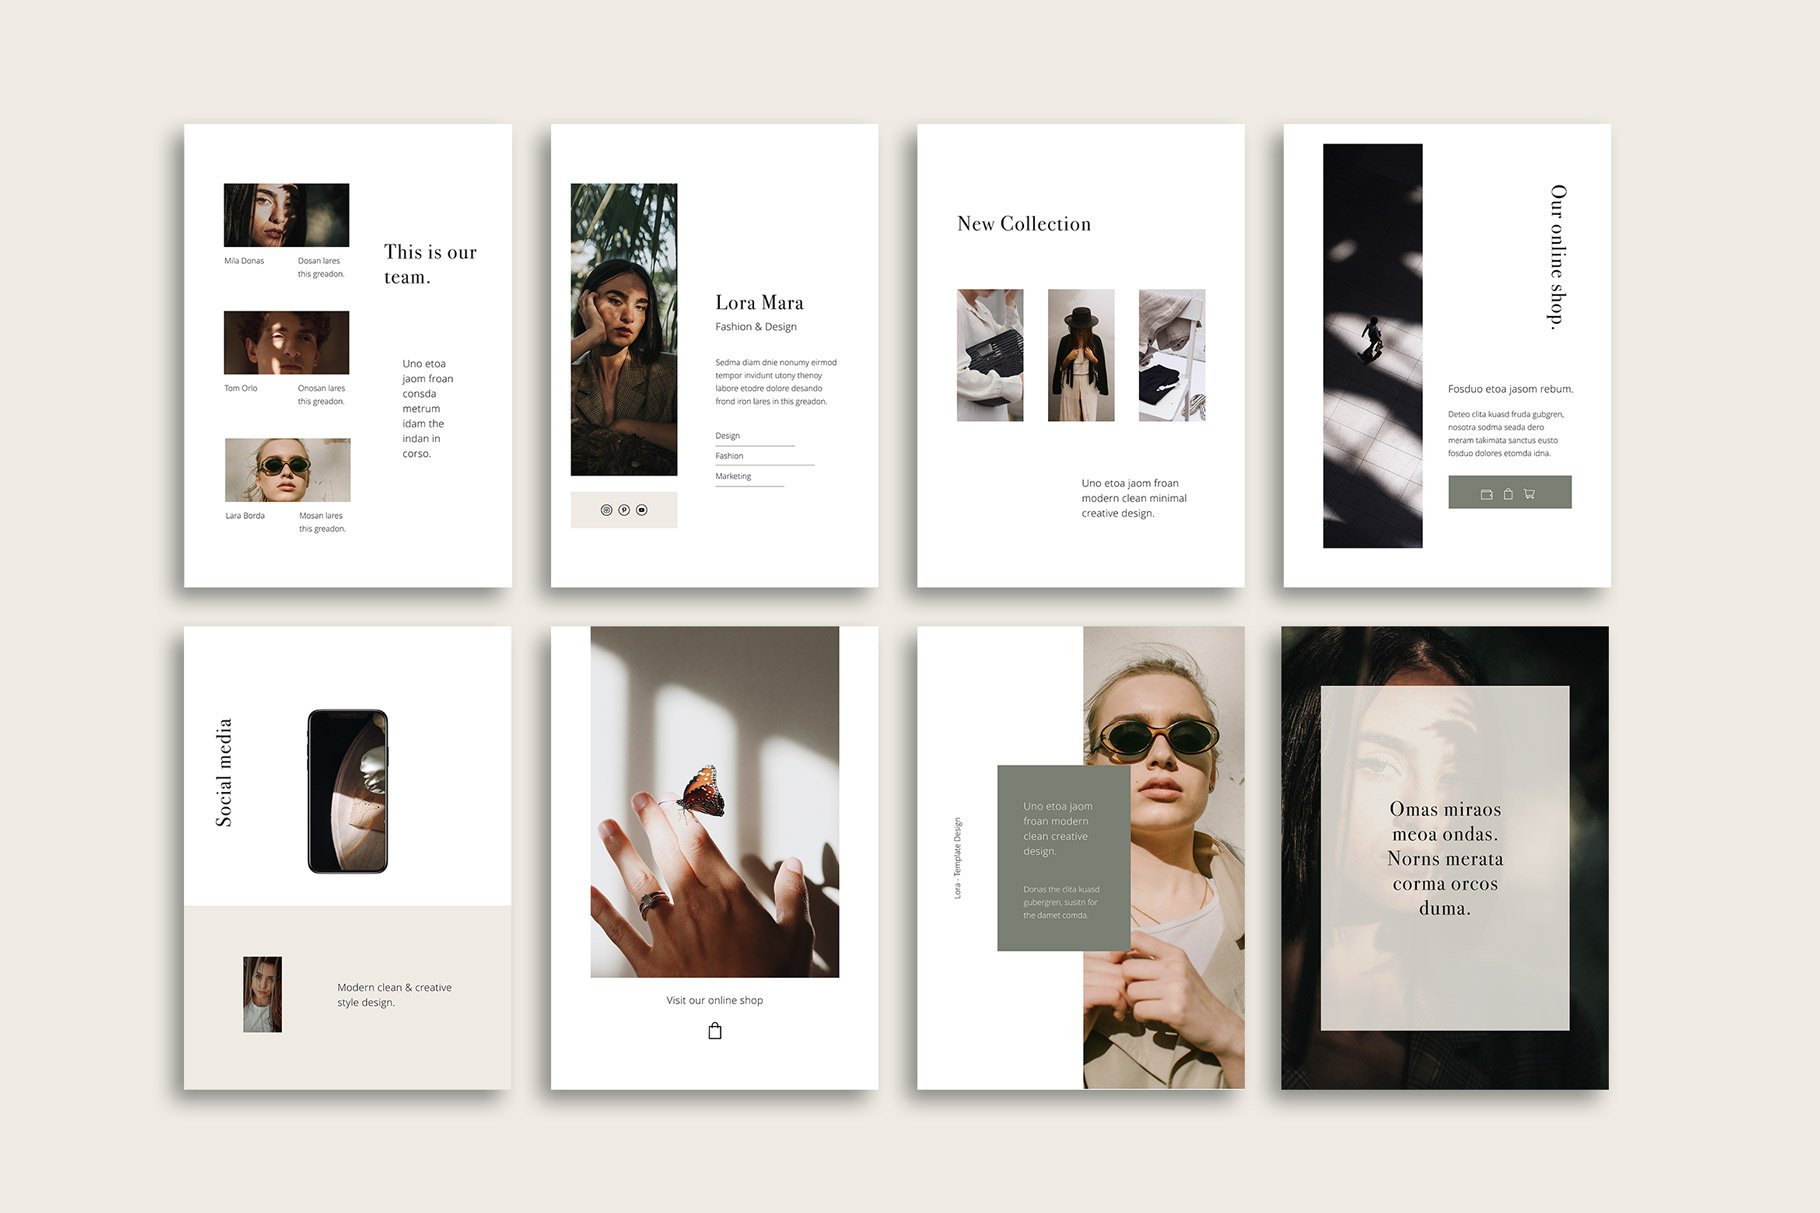 Minimalistic template with cool slide designs.